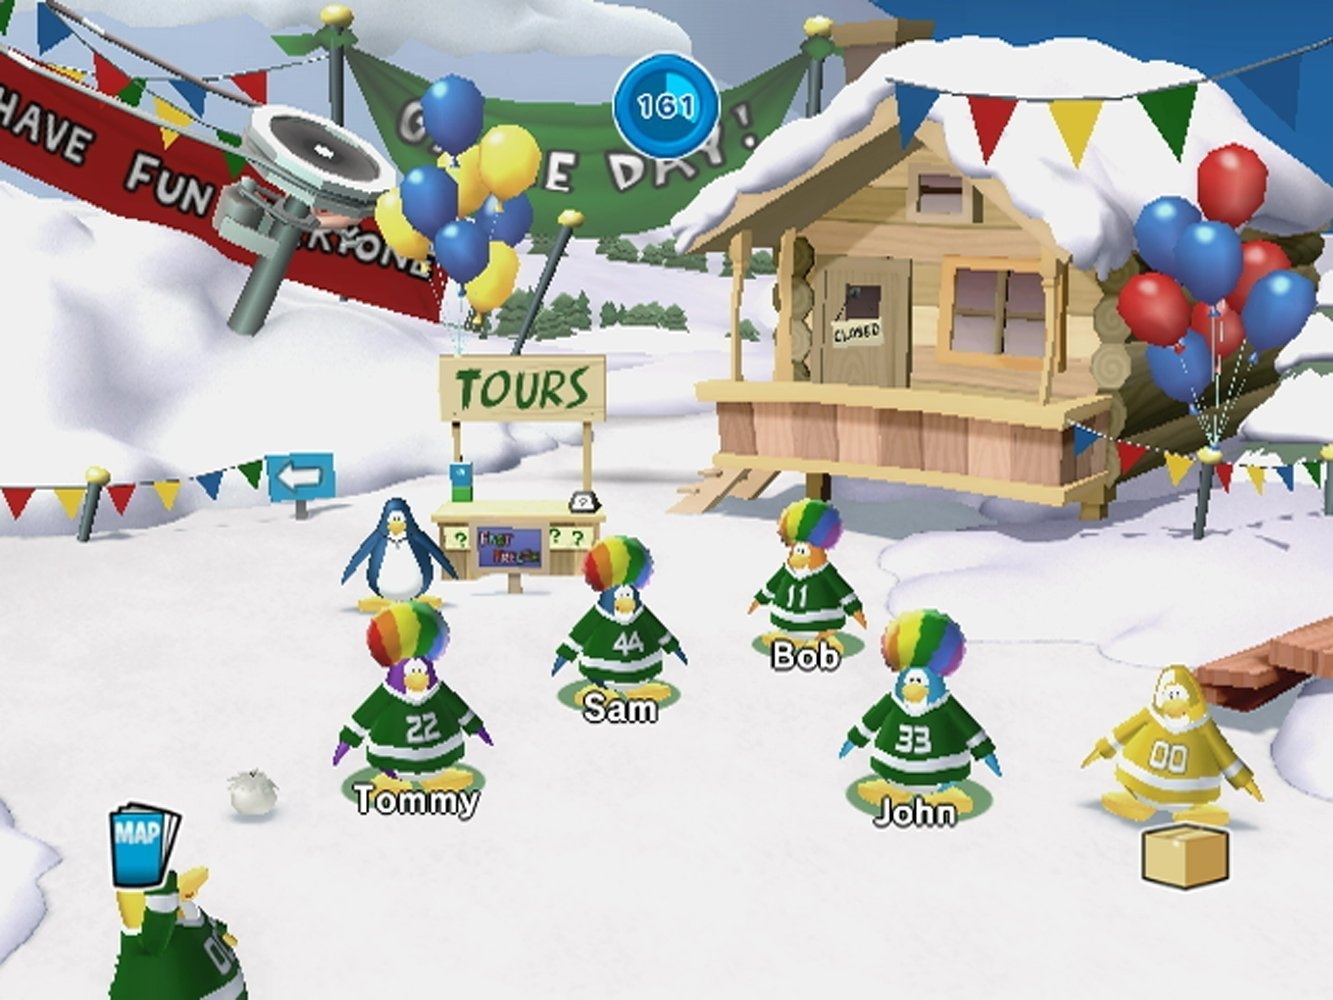 Wii - Club Penguin: Game Day! - Minigame Instructions - The Spriters  Resource